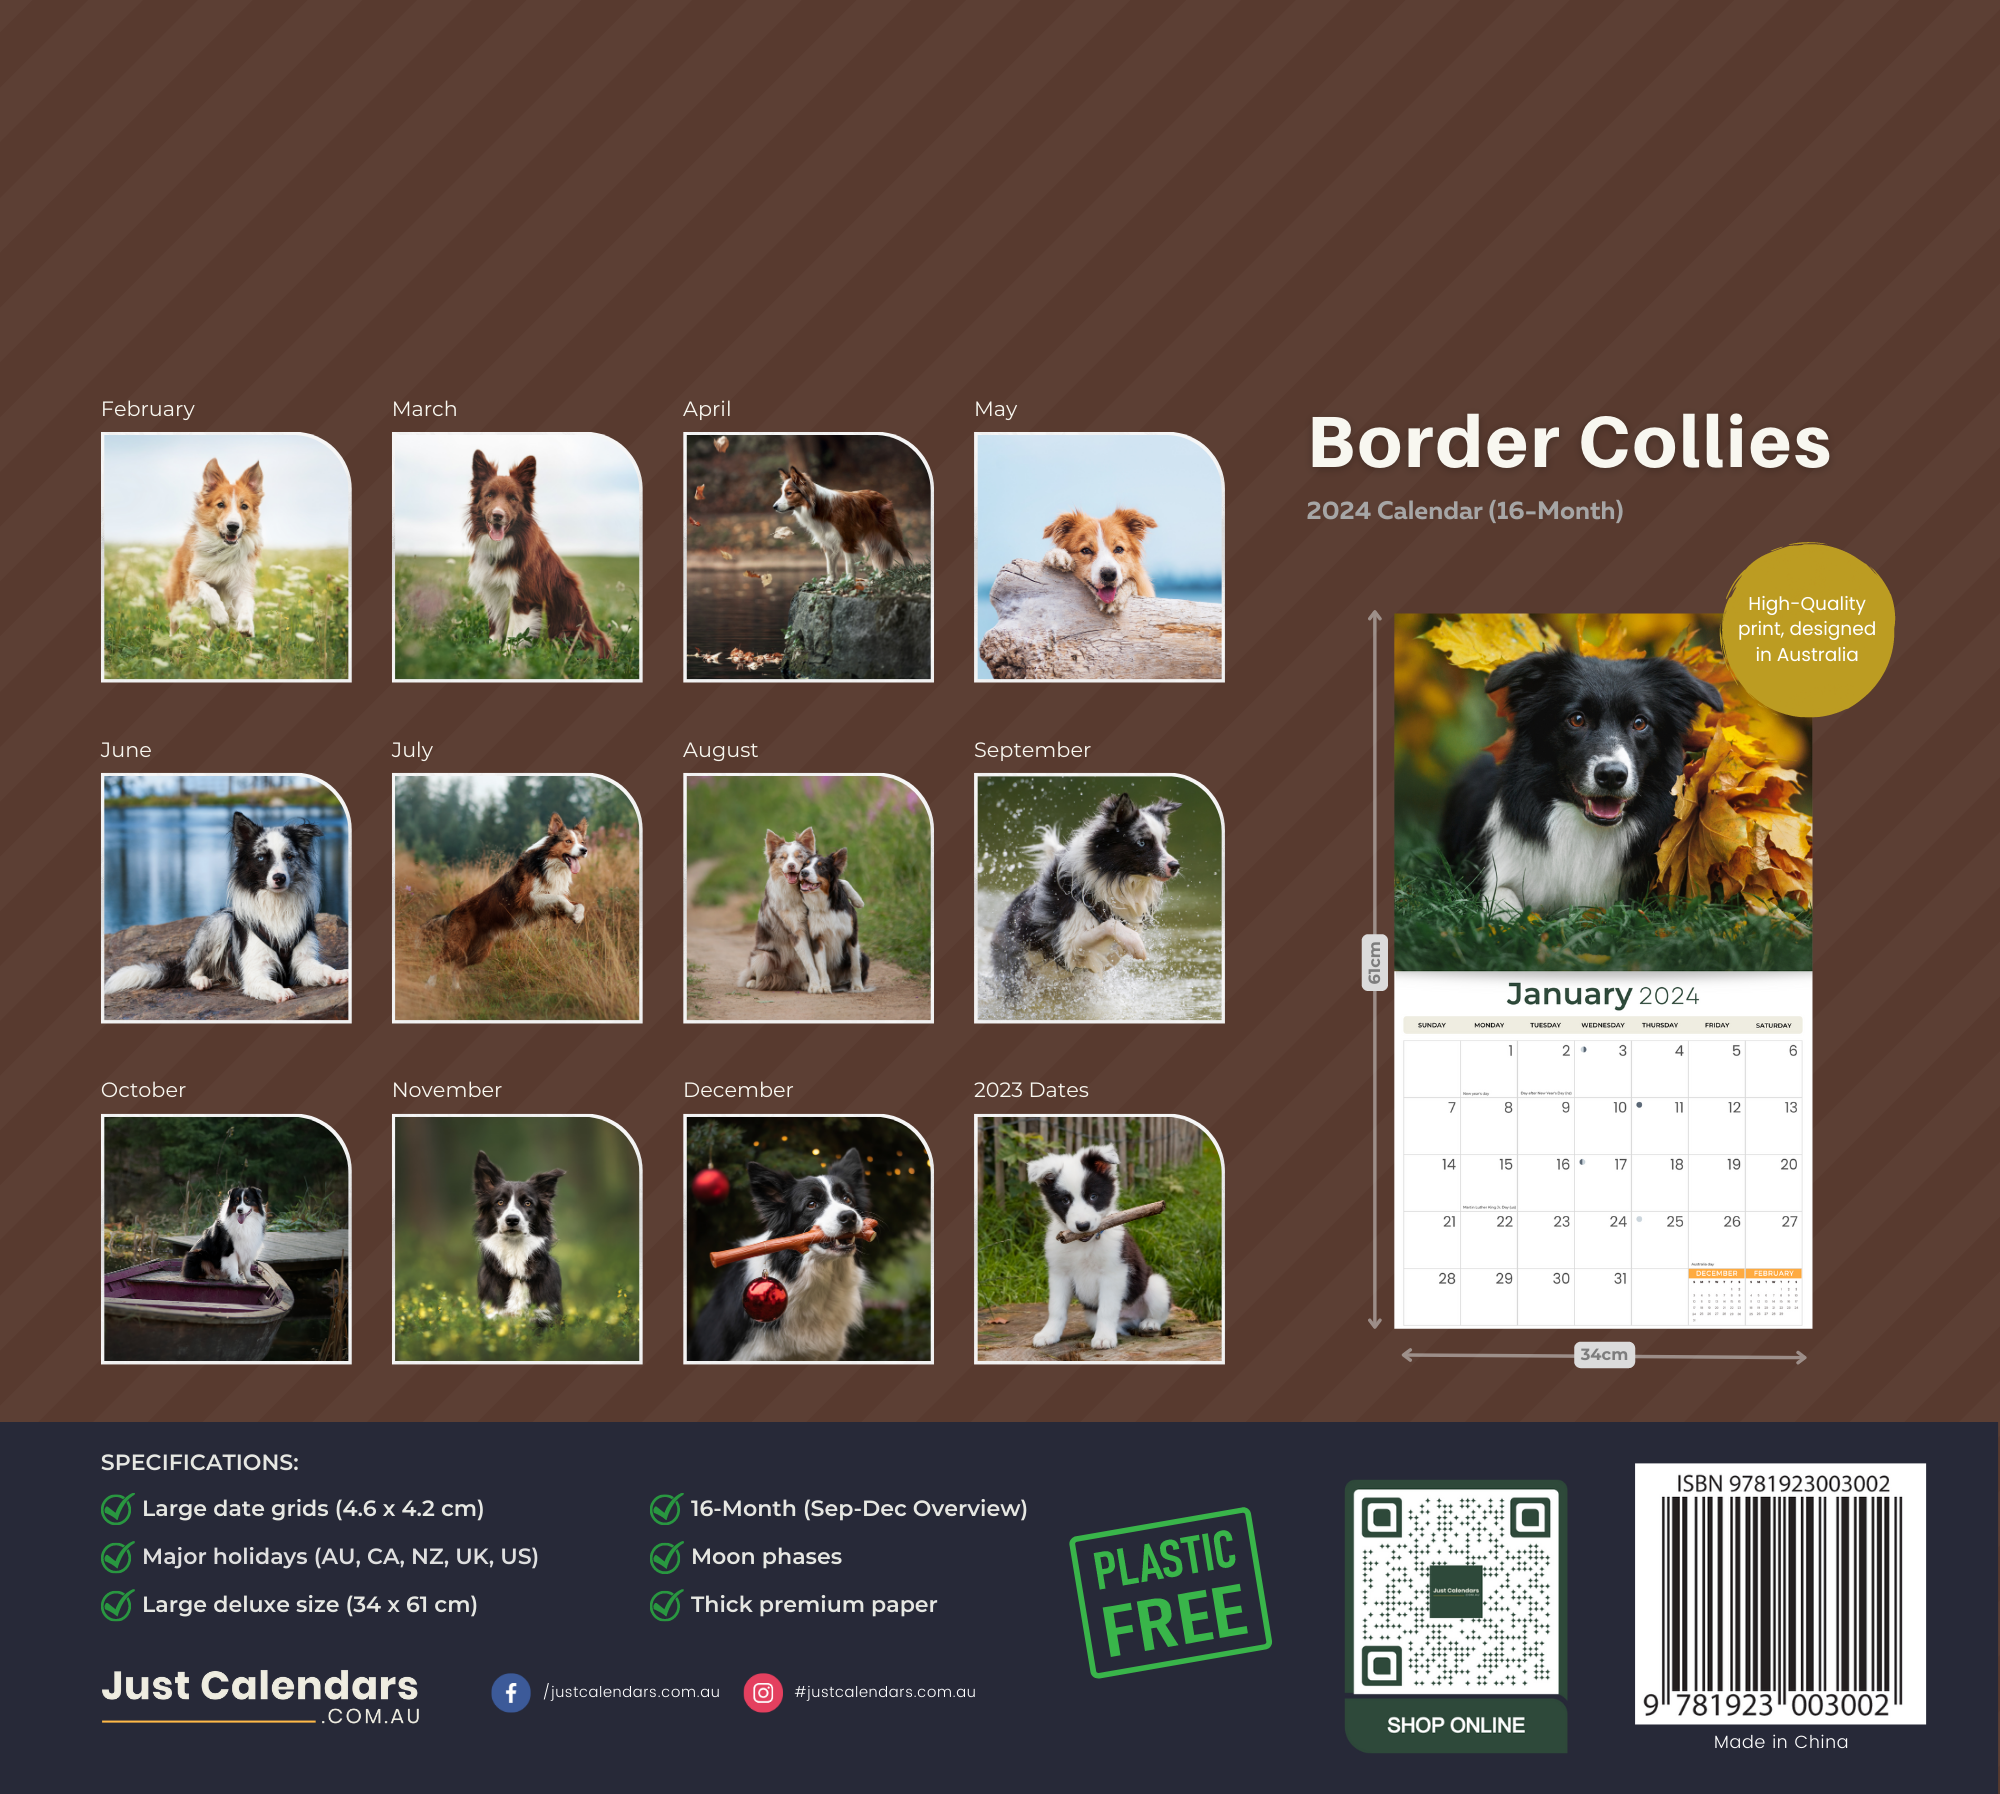 2024 Border Collies Dogs & Puppies - Deluxe Wall Calendar by Just Calendars - 16 Month - Plastic Free